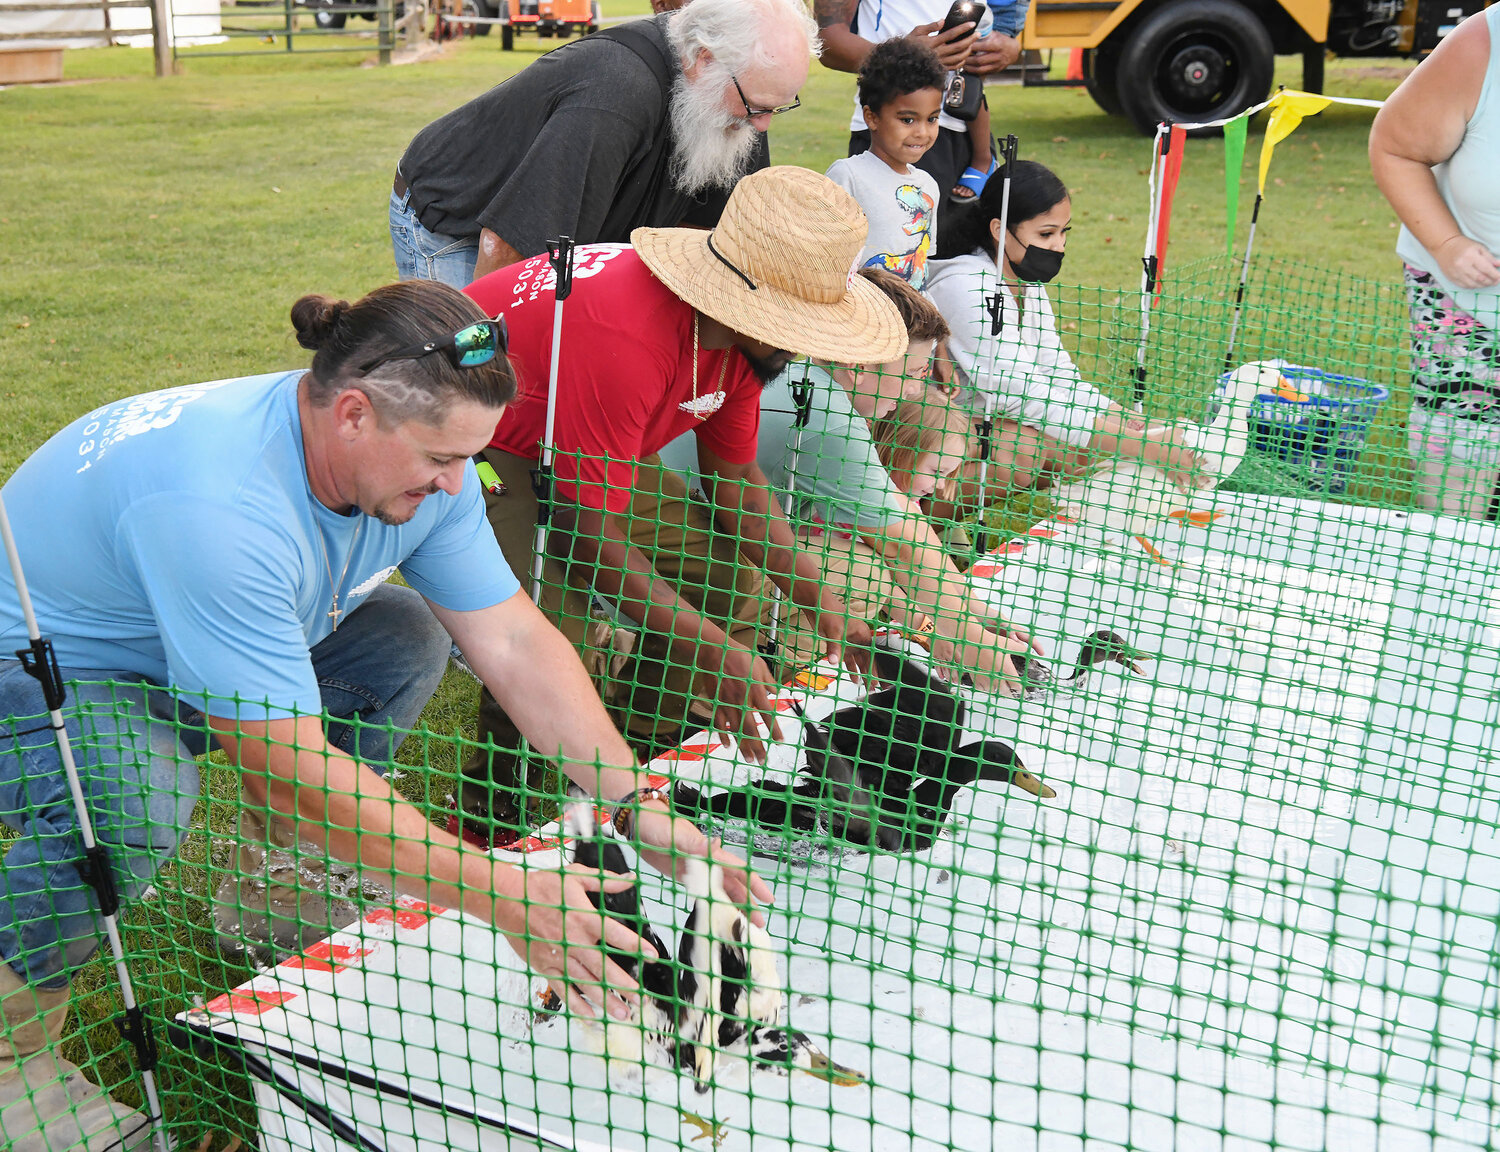 Ronnie Cain, left, of Salisbury, and William Smallwood of Seaford place their ducks into competition during the duck races.